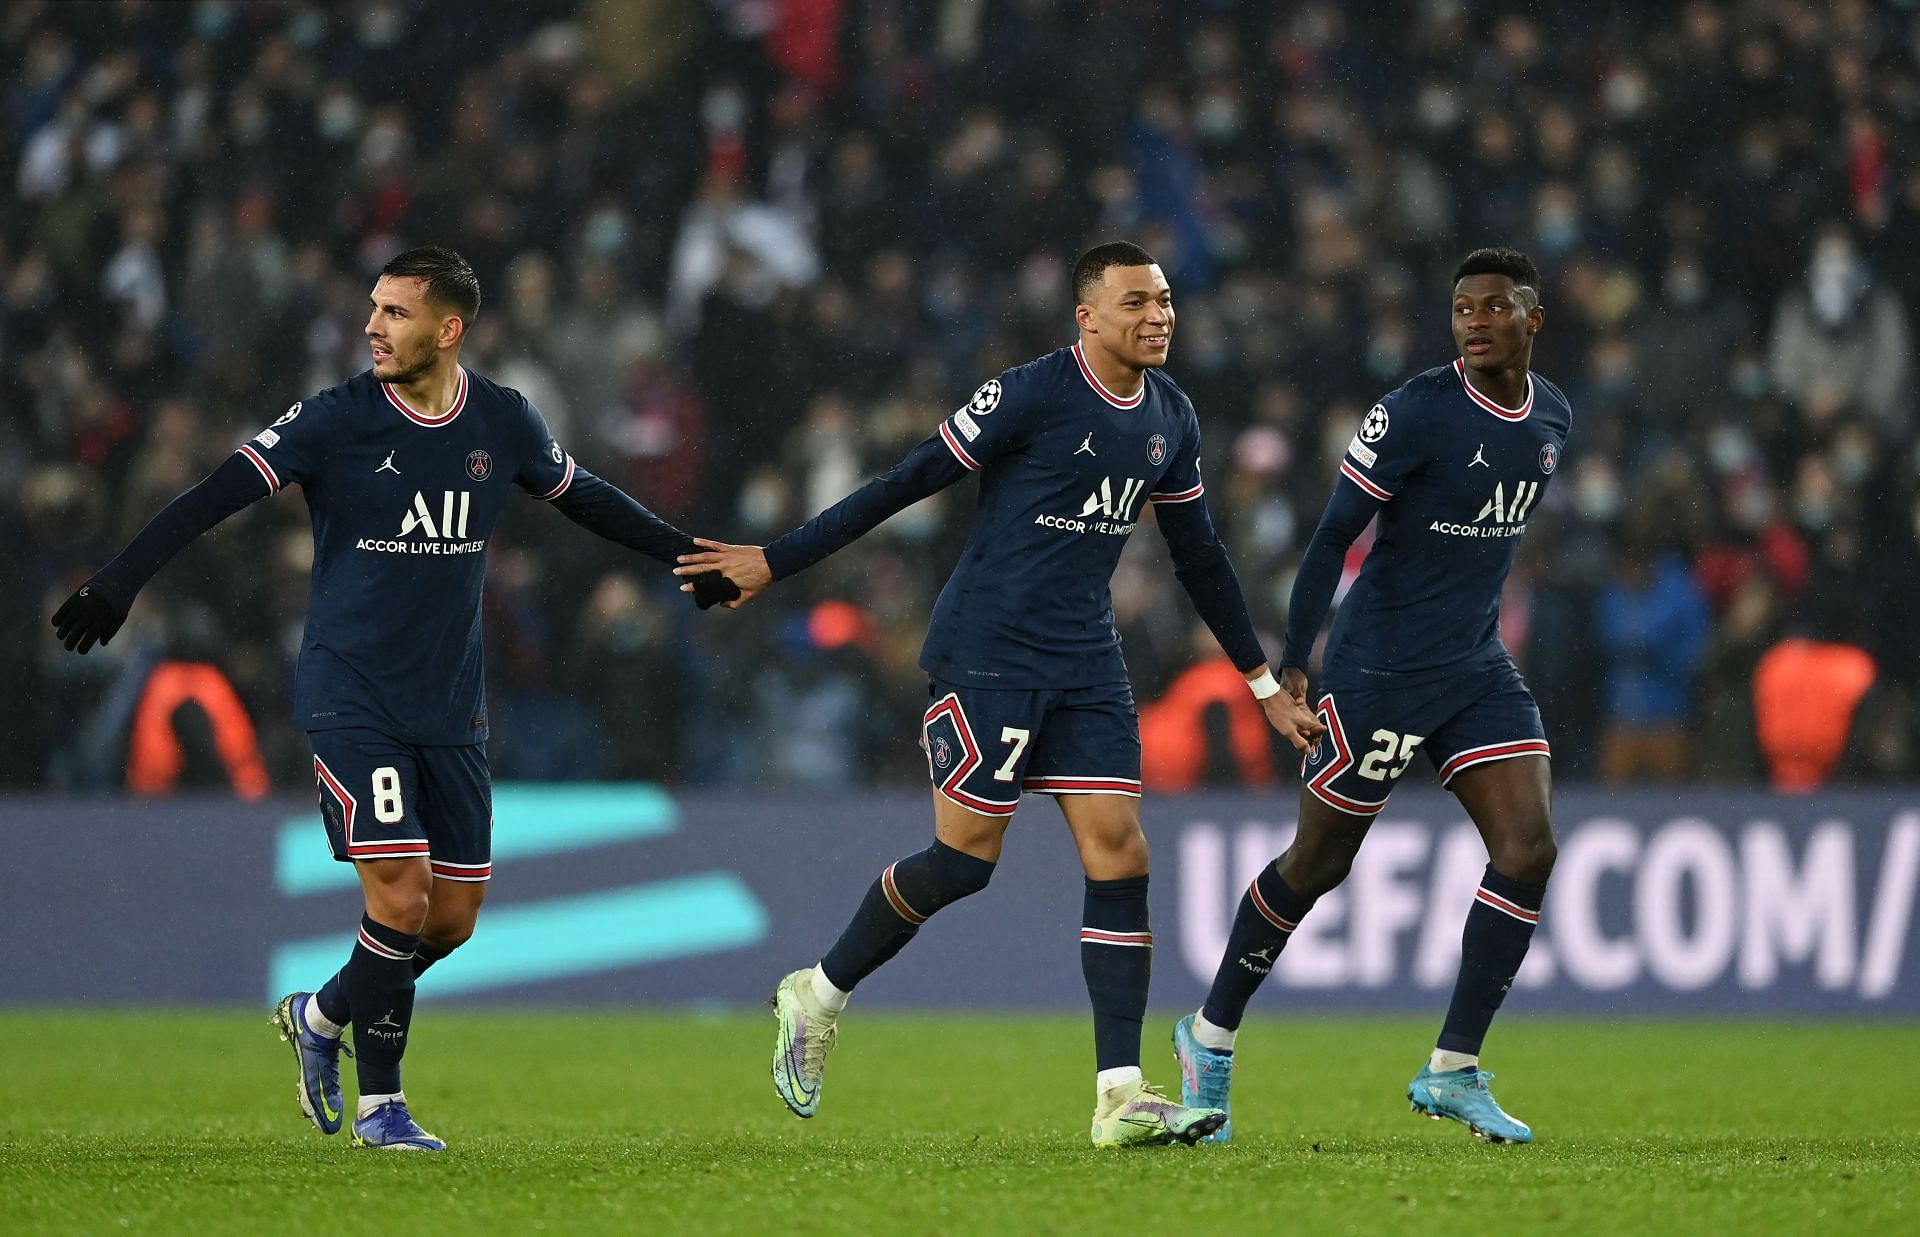 The Parisians take a small yet significant lead into the second-leg